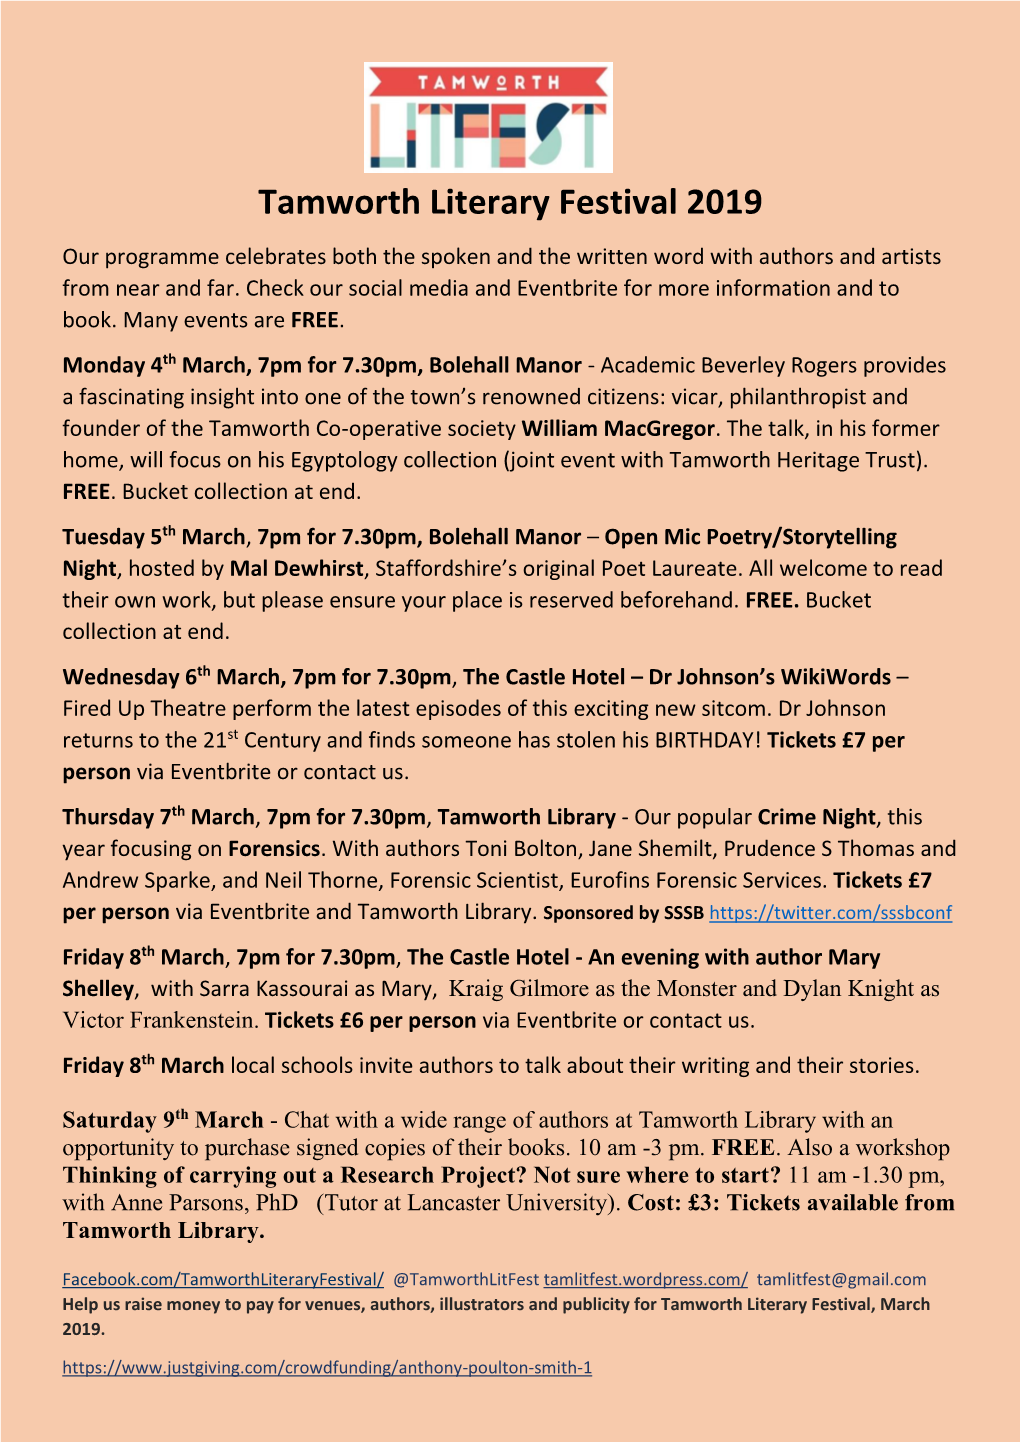 Tamworth Literary Festival 2019 Our Programme Celebrates Both the Spoken and the Written Word with Authors and Artists from Near and Far